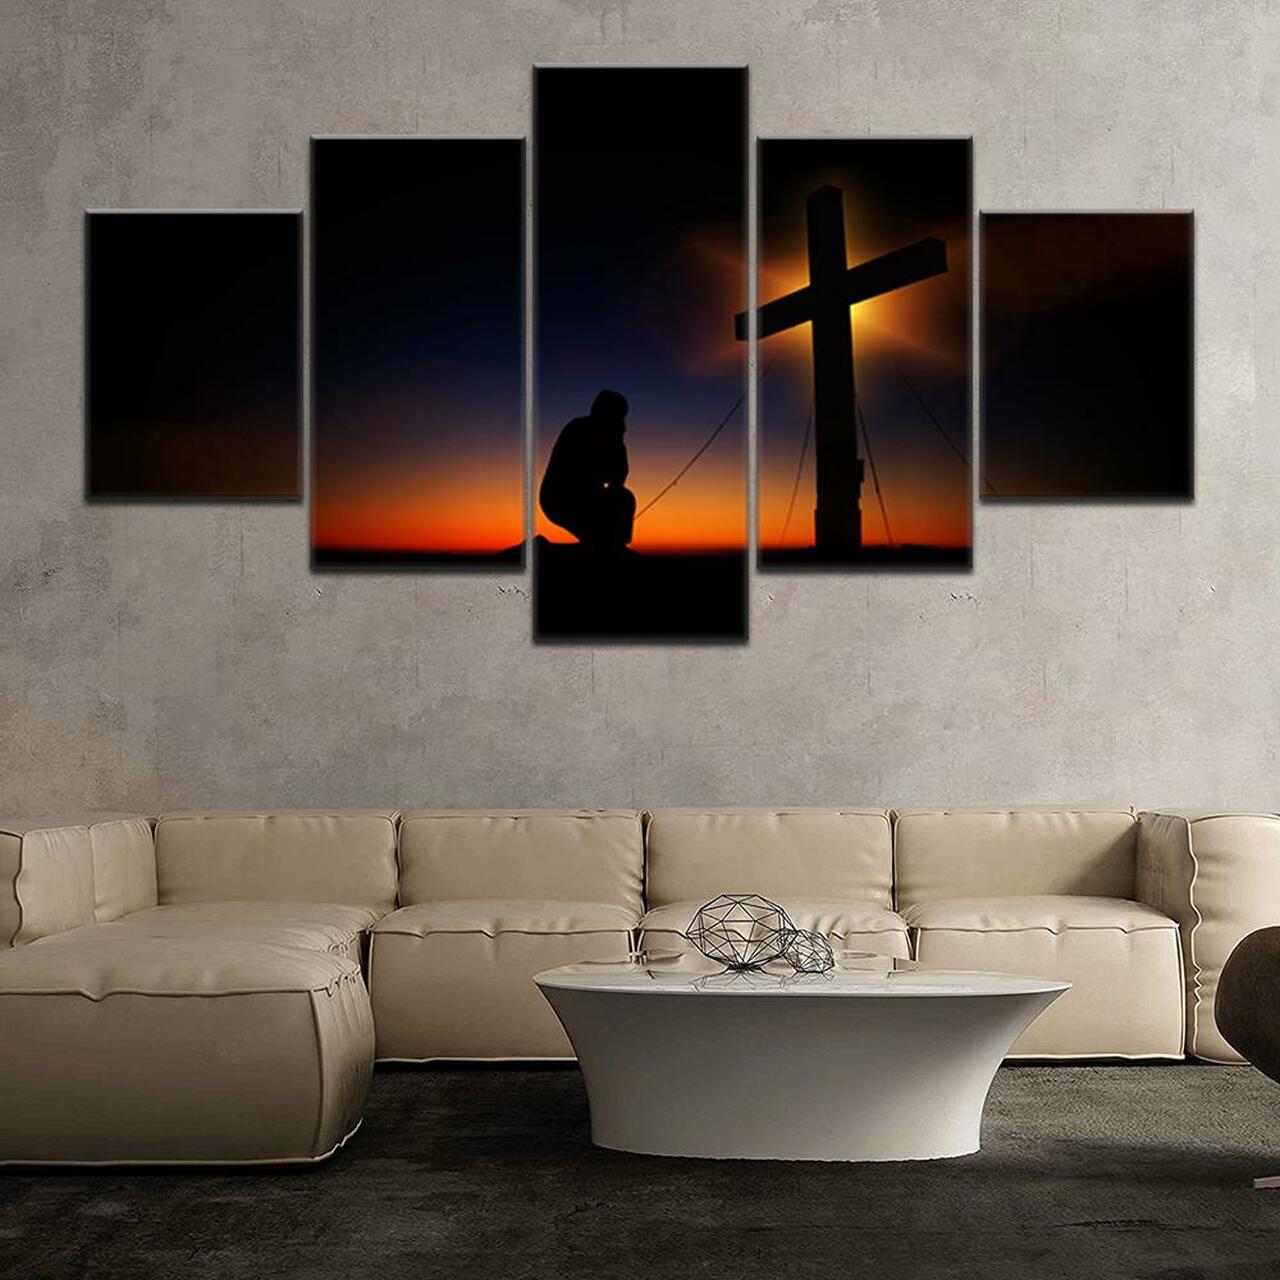 PRAY BEFORE THE LORD 5 Piece Canvas Art Wall Decor